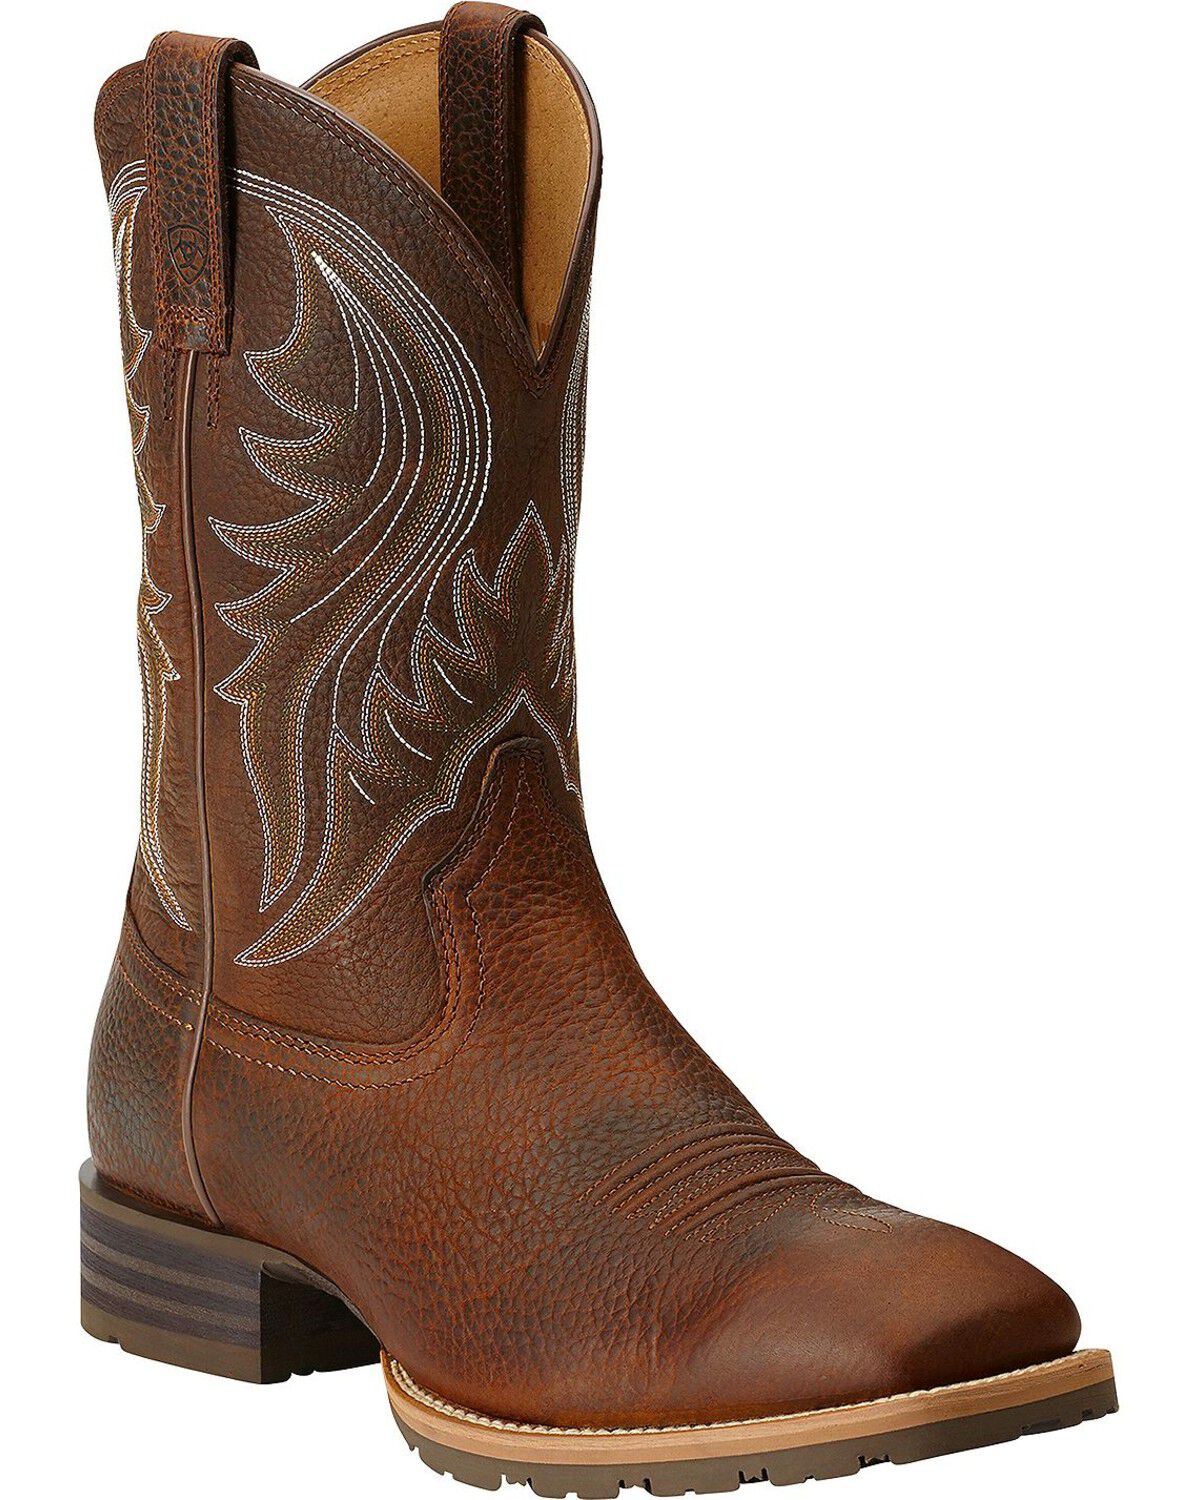 boot barn ariat boots